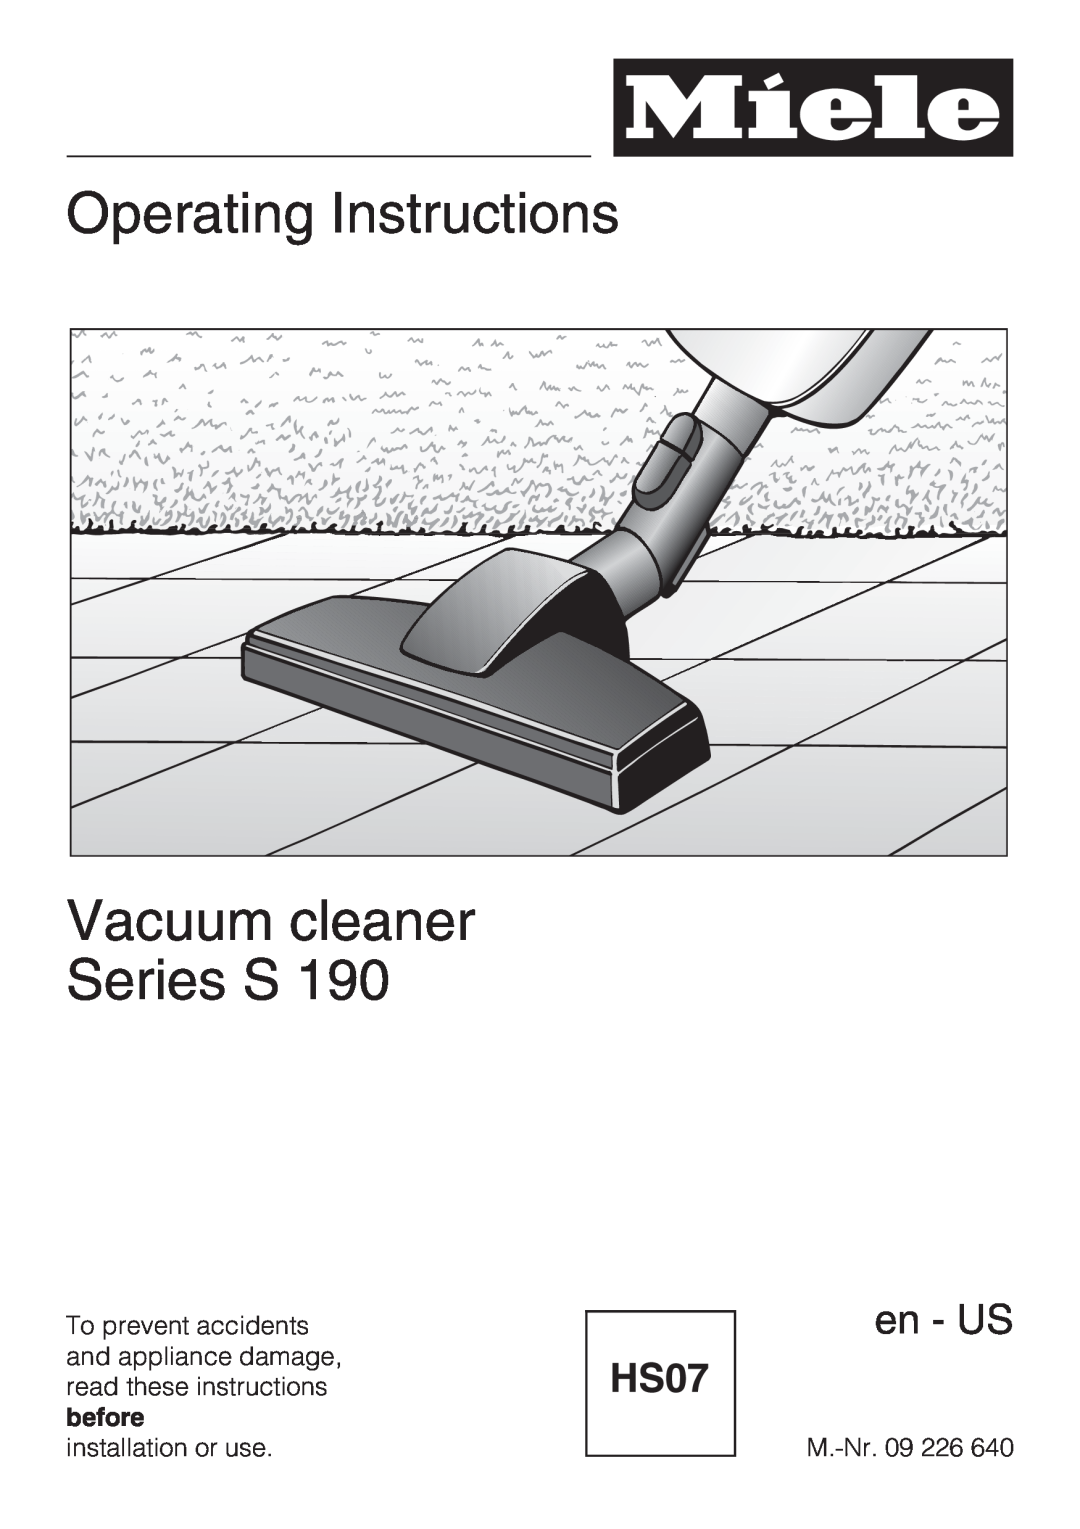 Miele S 190 operating instructions Operating Instructions Vacuum cleaner Series S, en - US 